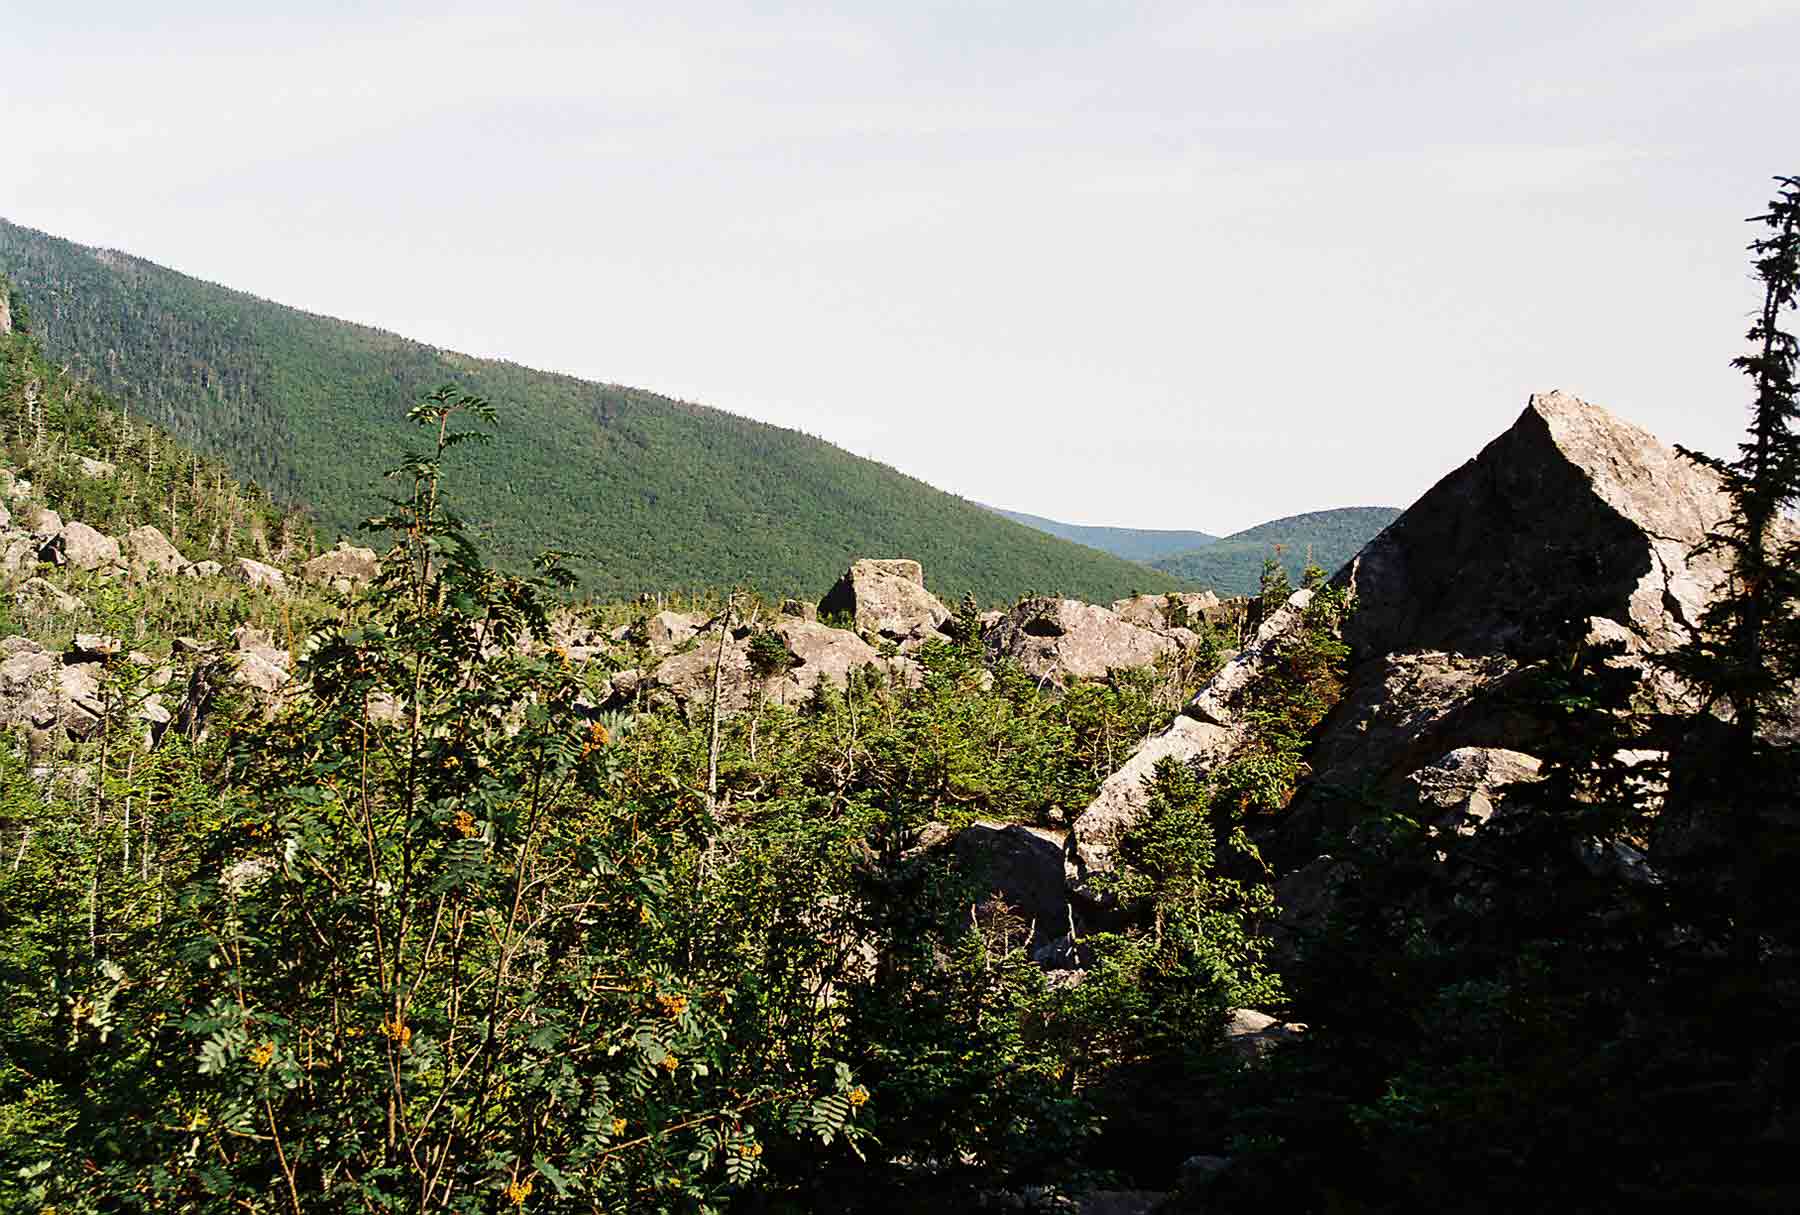 mm 15.2 - The Ramparts, a massive jumble of rocks, located just to the east of Carter Notch Hut. View is to the east.  Courtesy dlcul@conncoll.edu